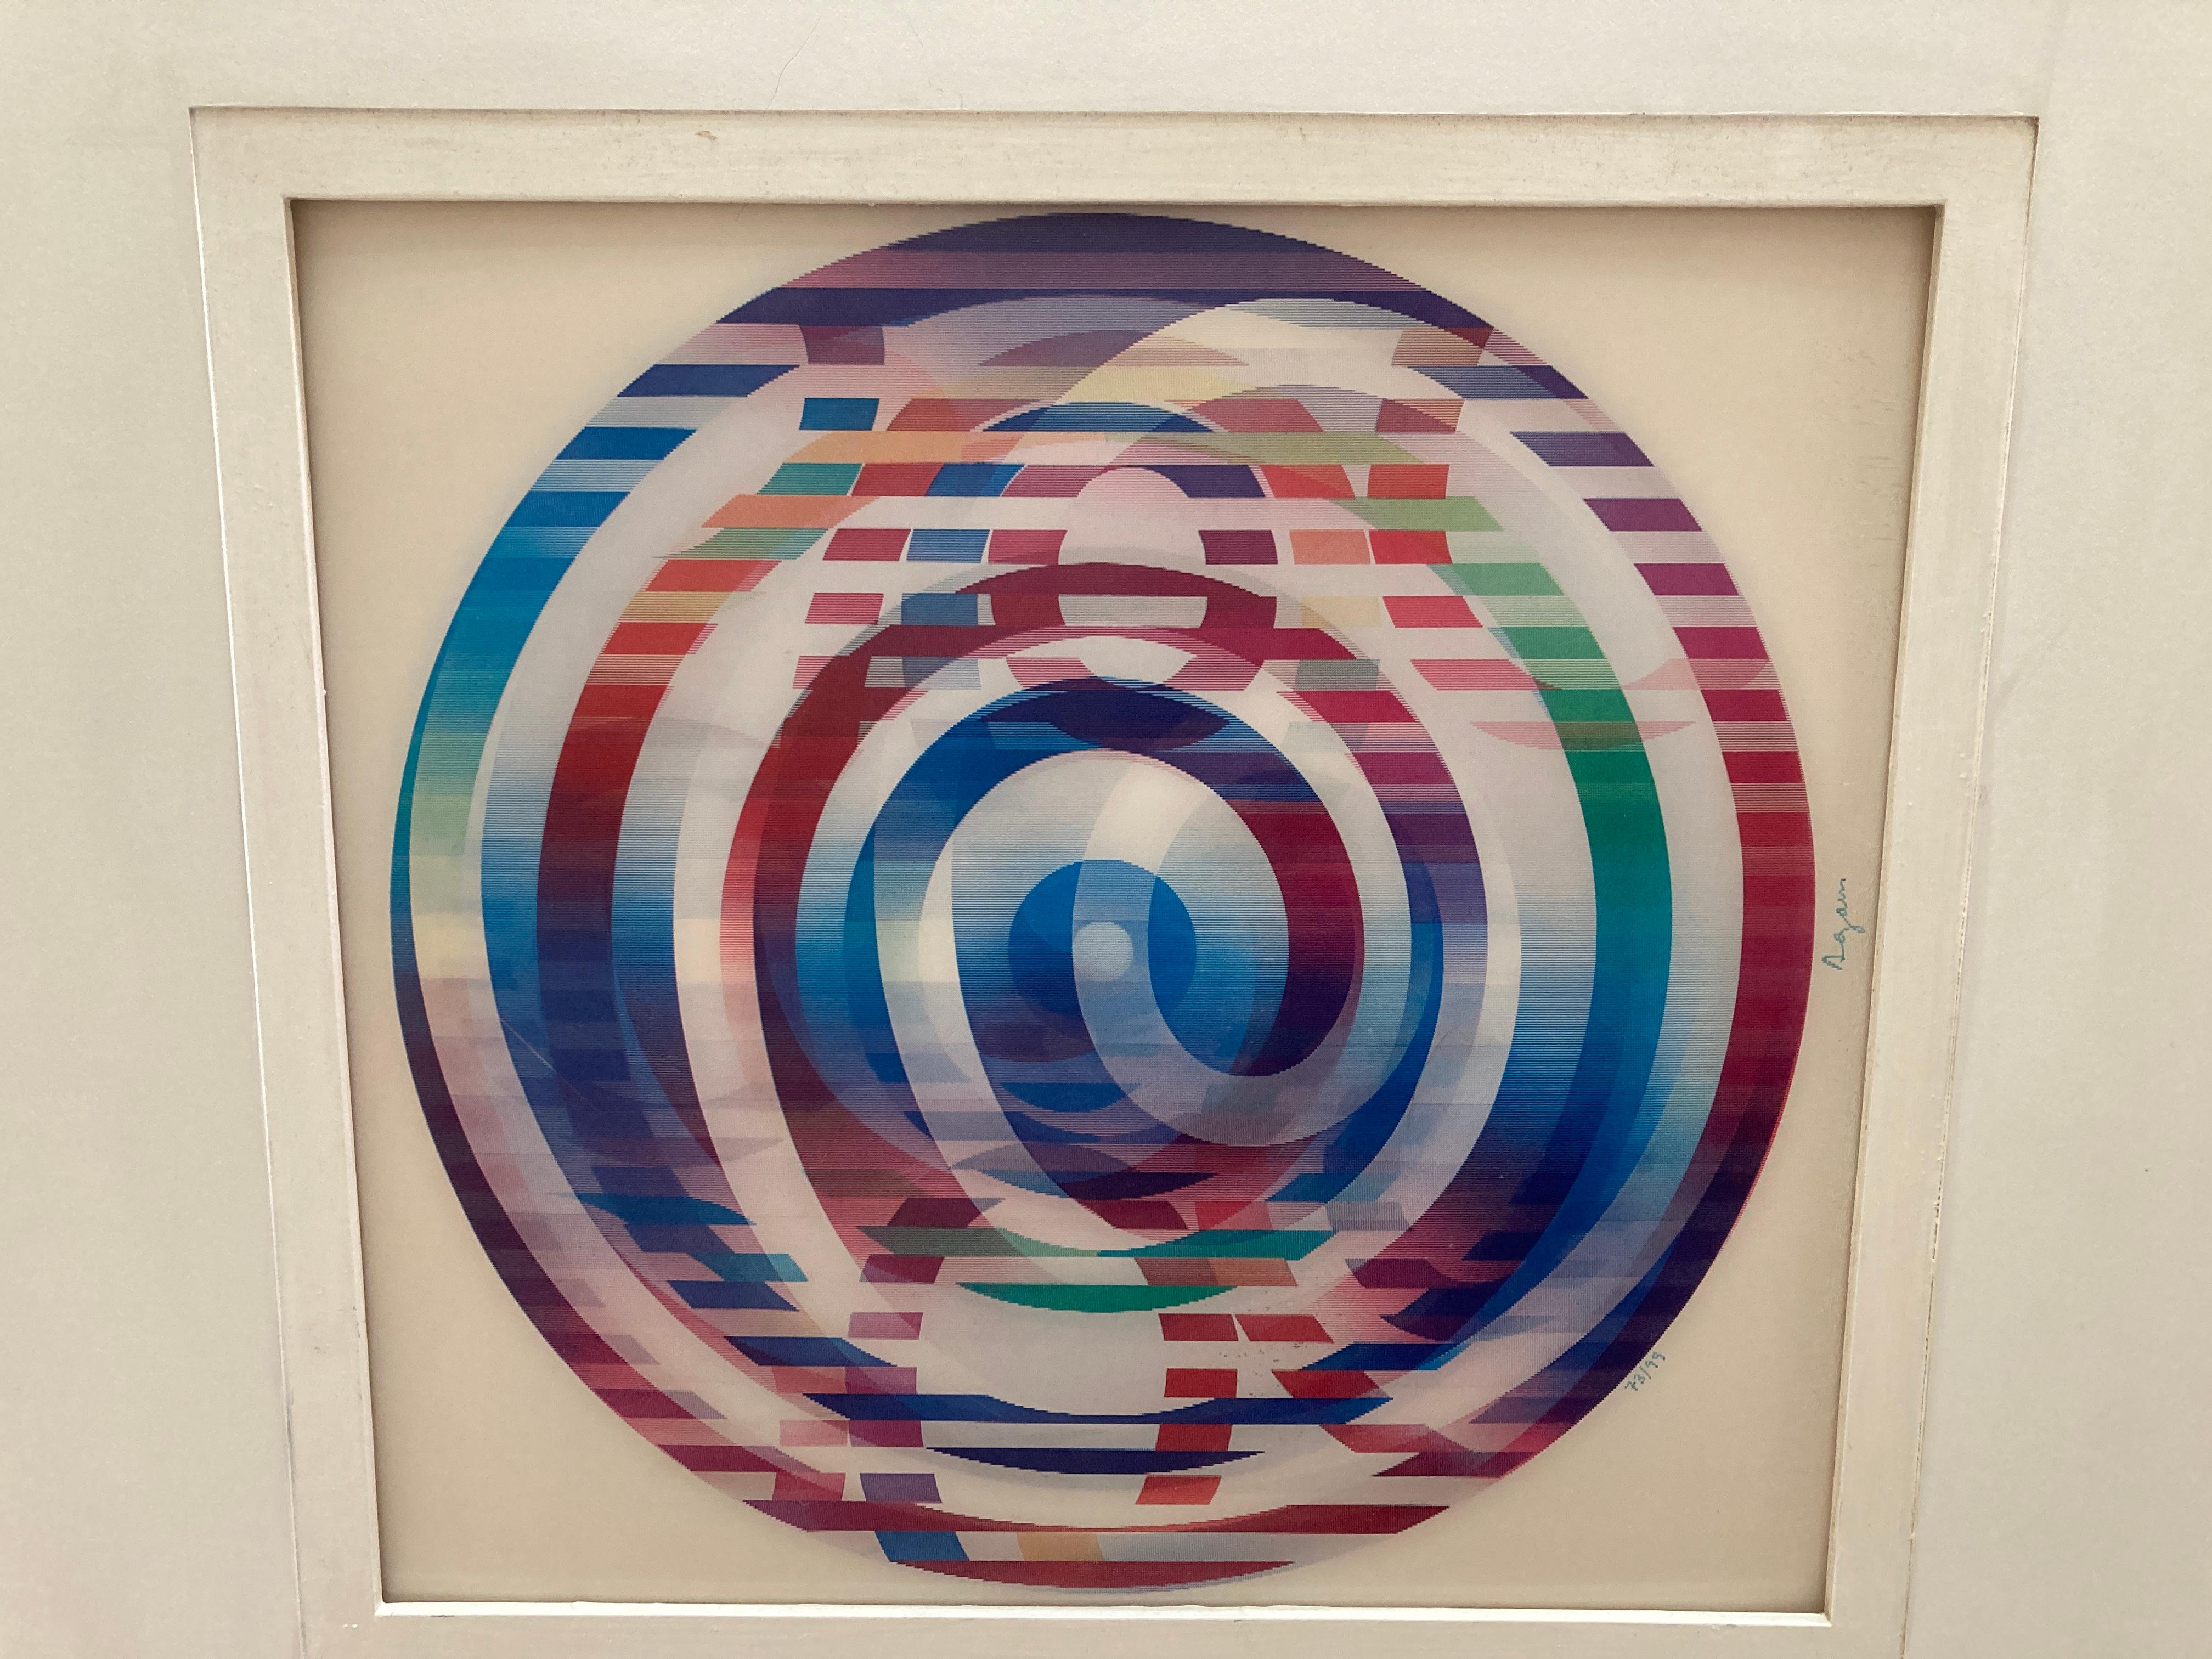 Yaacov Agam 'Image of the World' Signed, Limited Edition Lenticular Agamograph 2